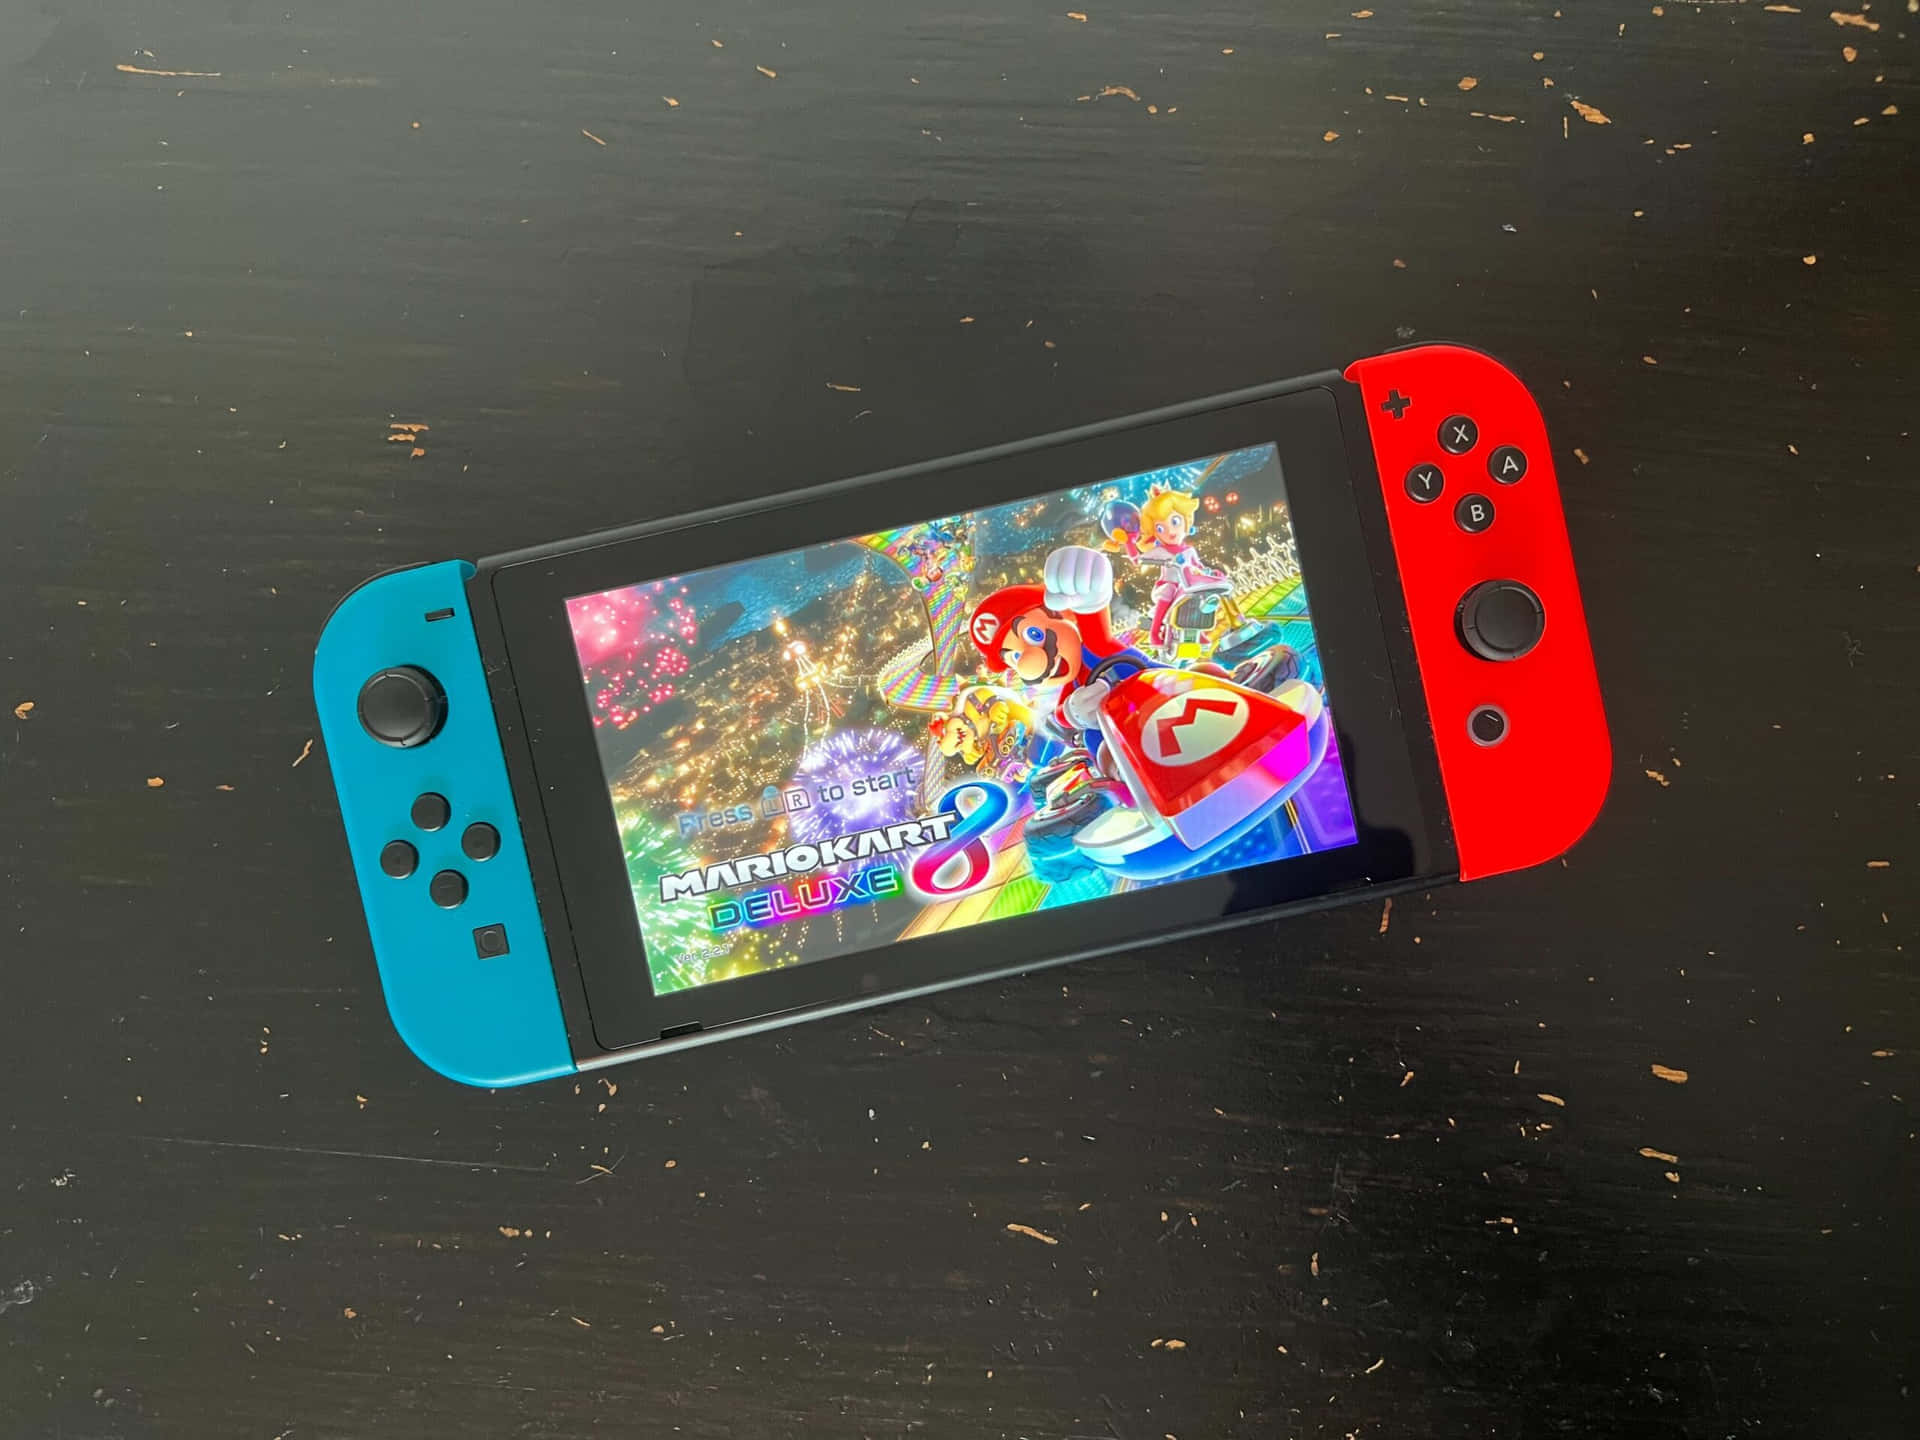 The innovative Nintendo Switch offers a gaming experience like no other